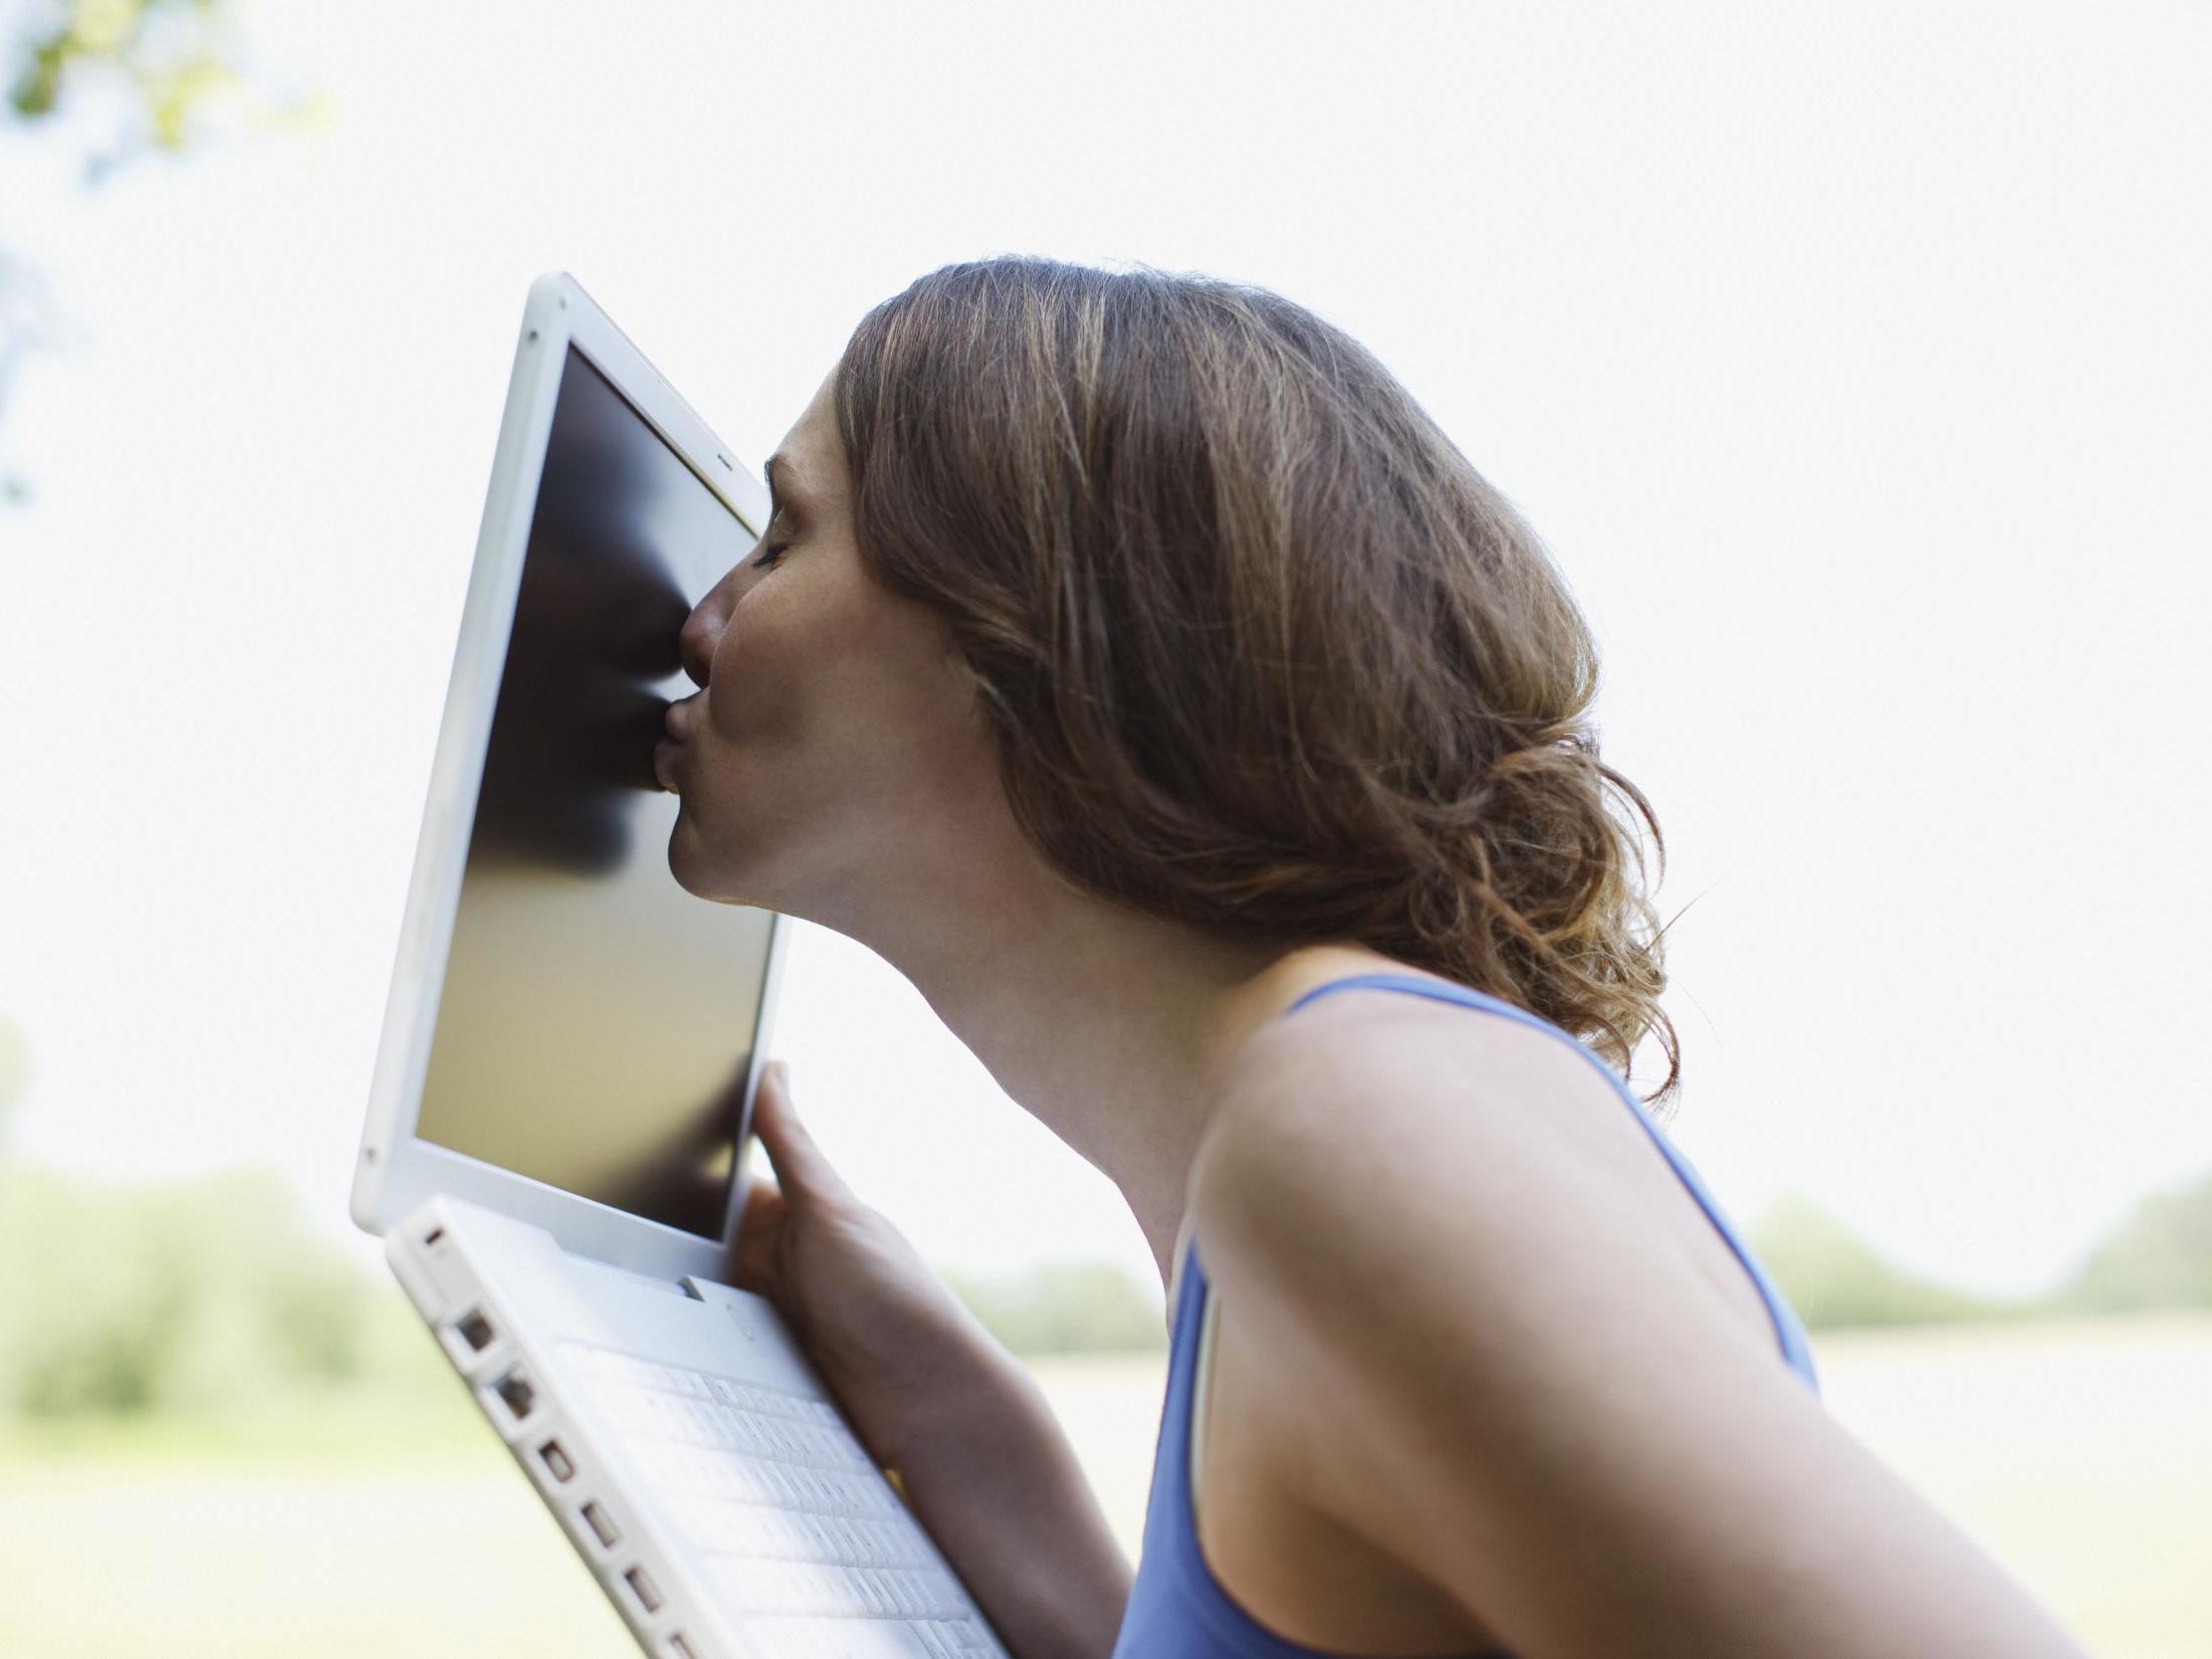 How to make your online dating profile stand out